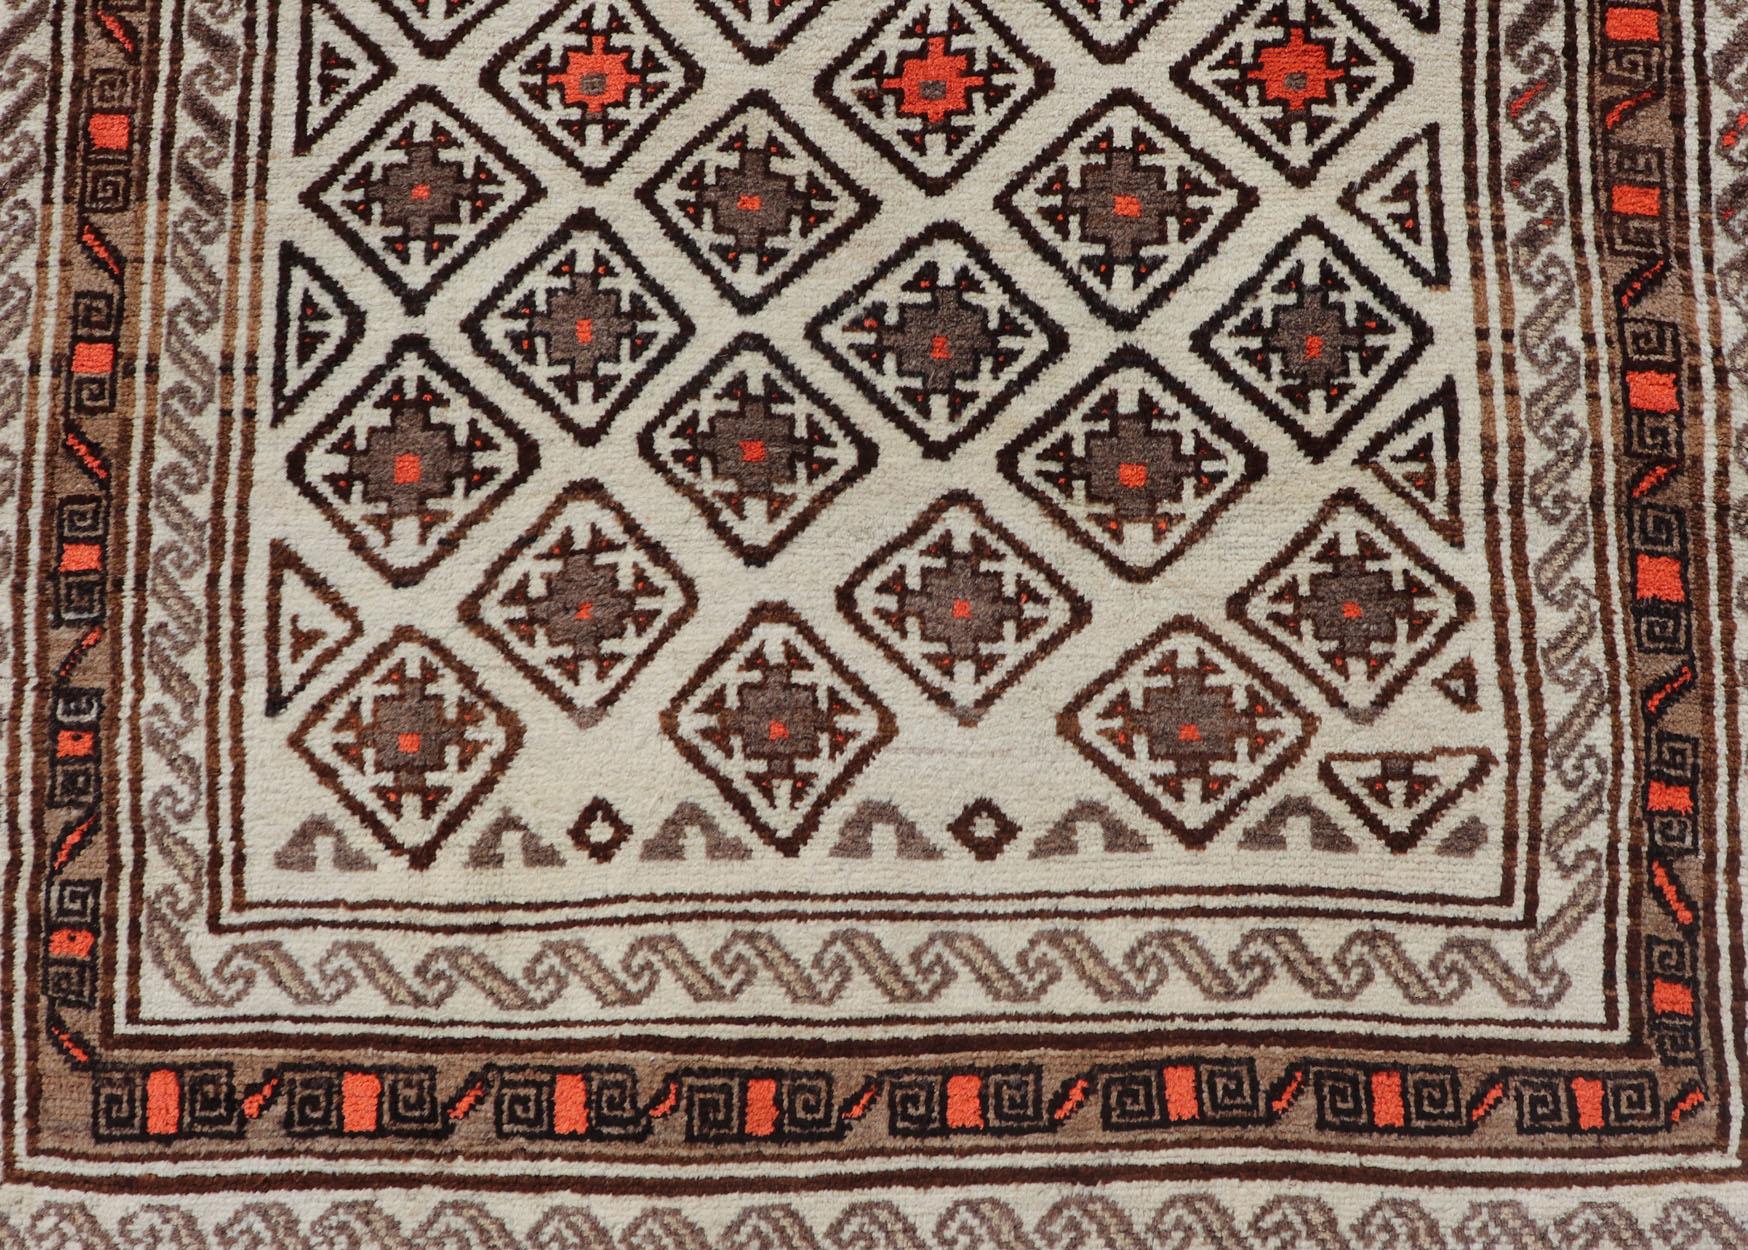 Antique hand-knotted Baluch tribal rug with all-over geometric diamond design. Keivan Woven Arts, rug EMB-9679-P13559; country of origin / type: Iran / Baluch, circa 1930s.

This Antique Baluch rug has been hand-knotted and features an impressive